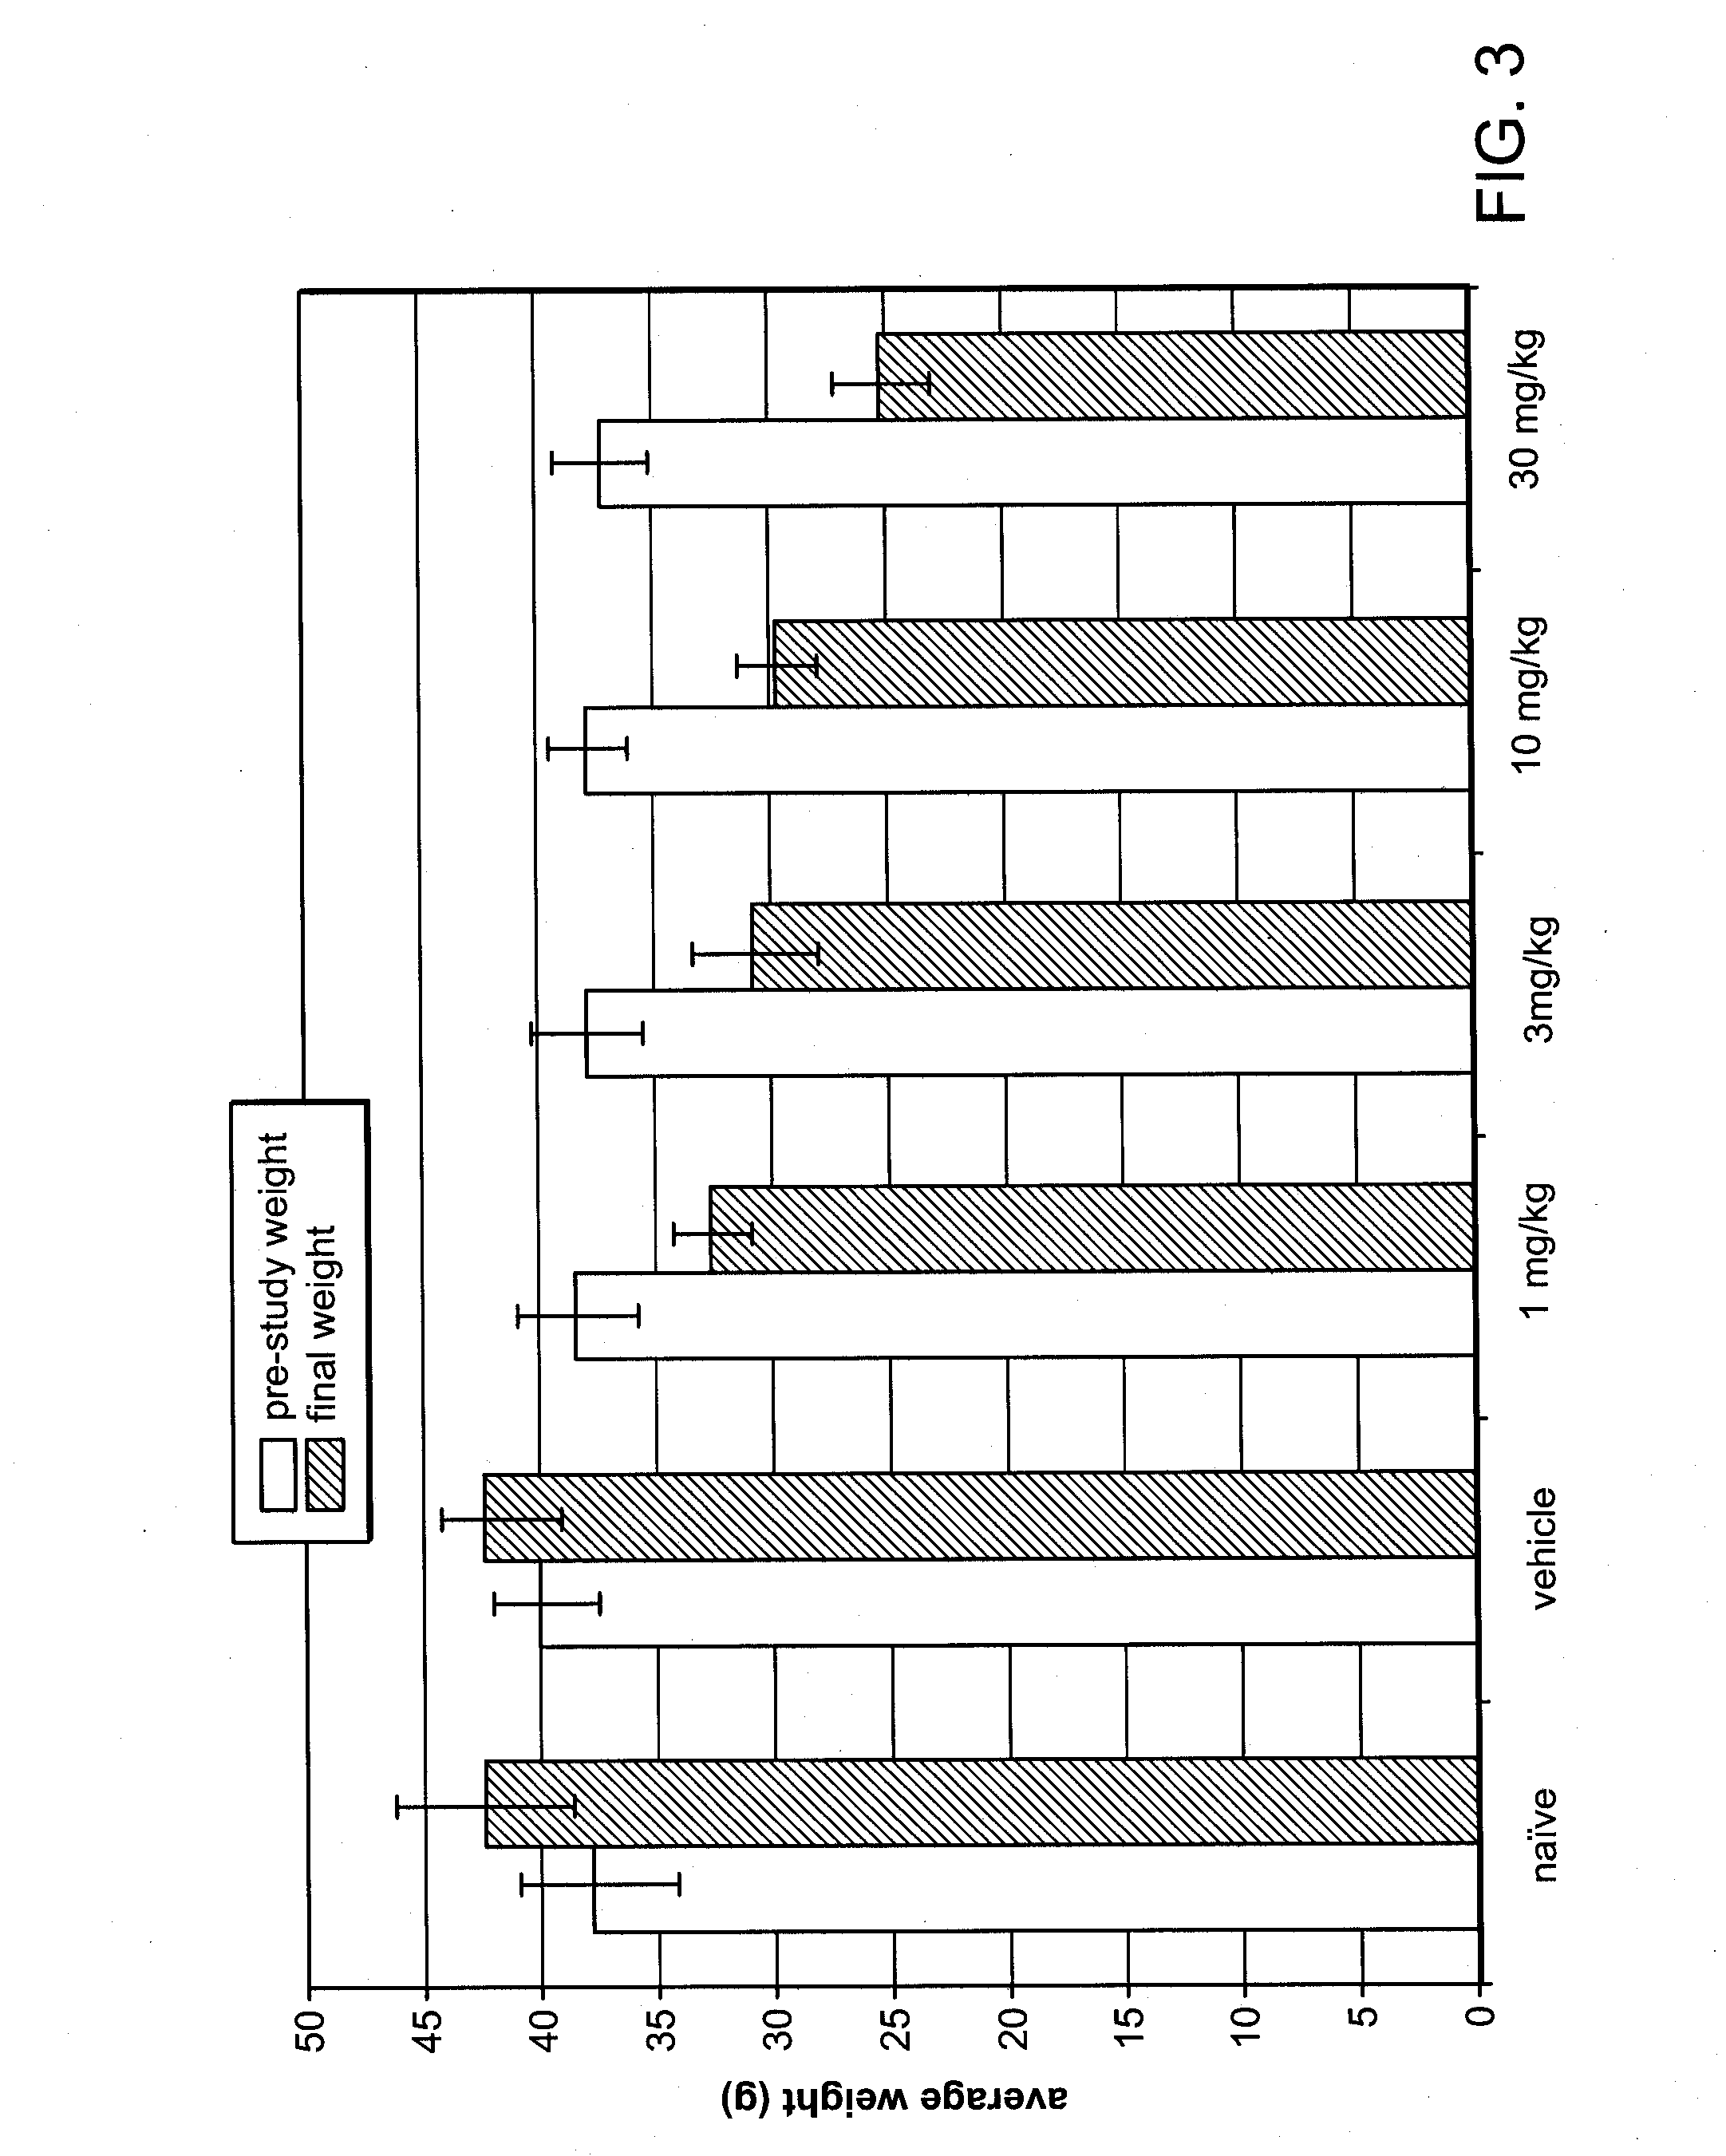 Methods of treating an overweight or obese subject